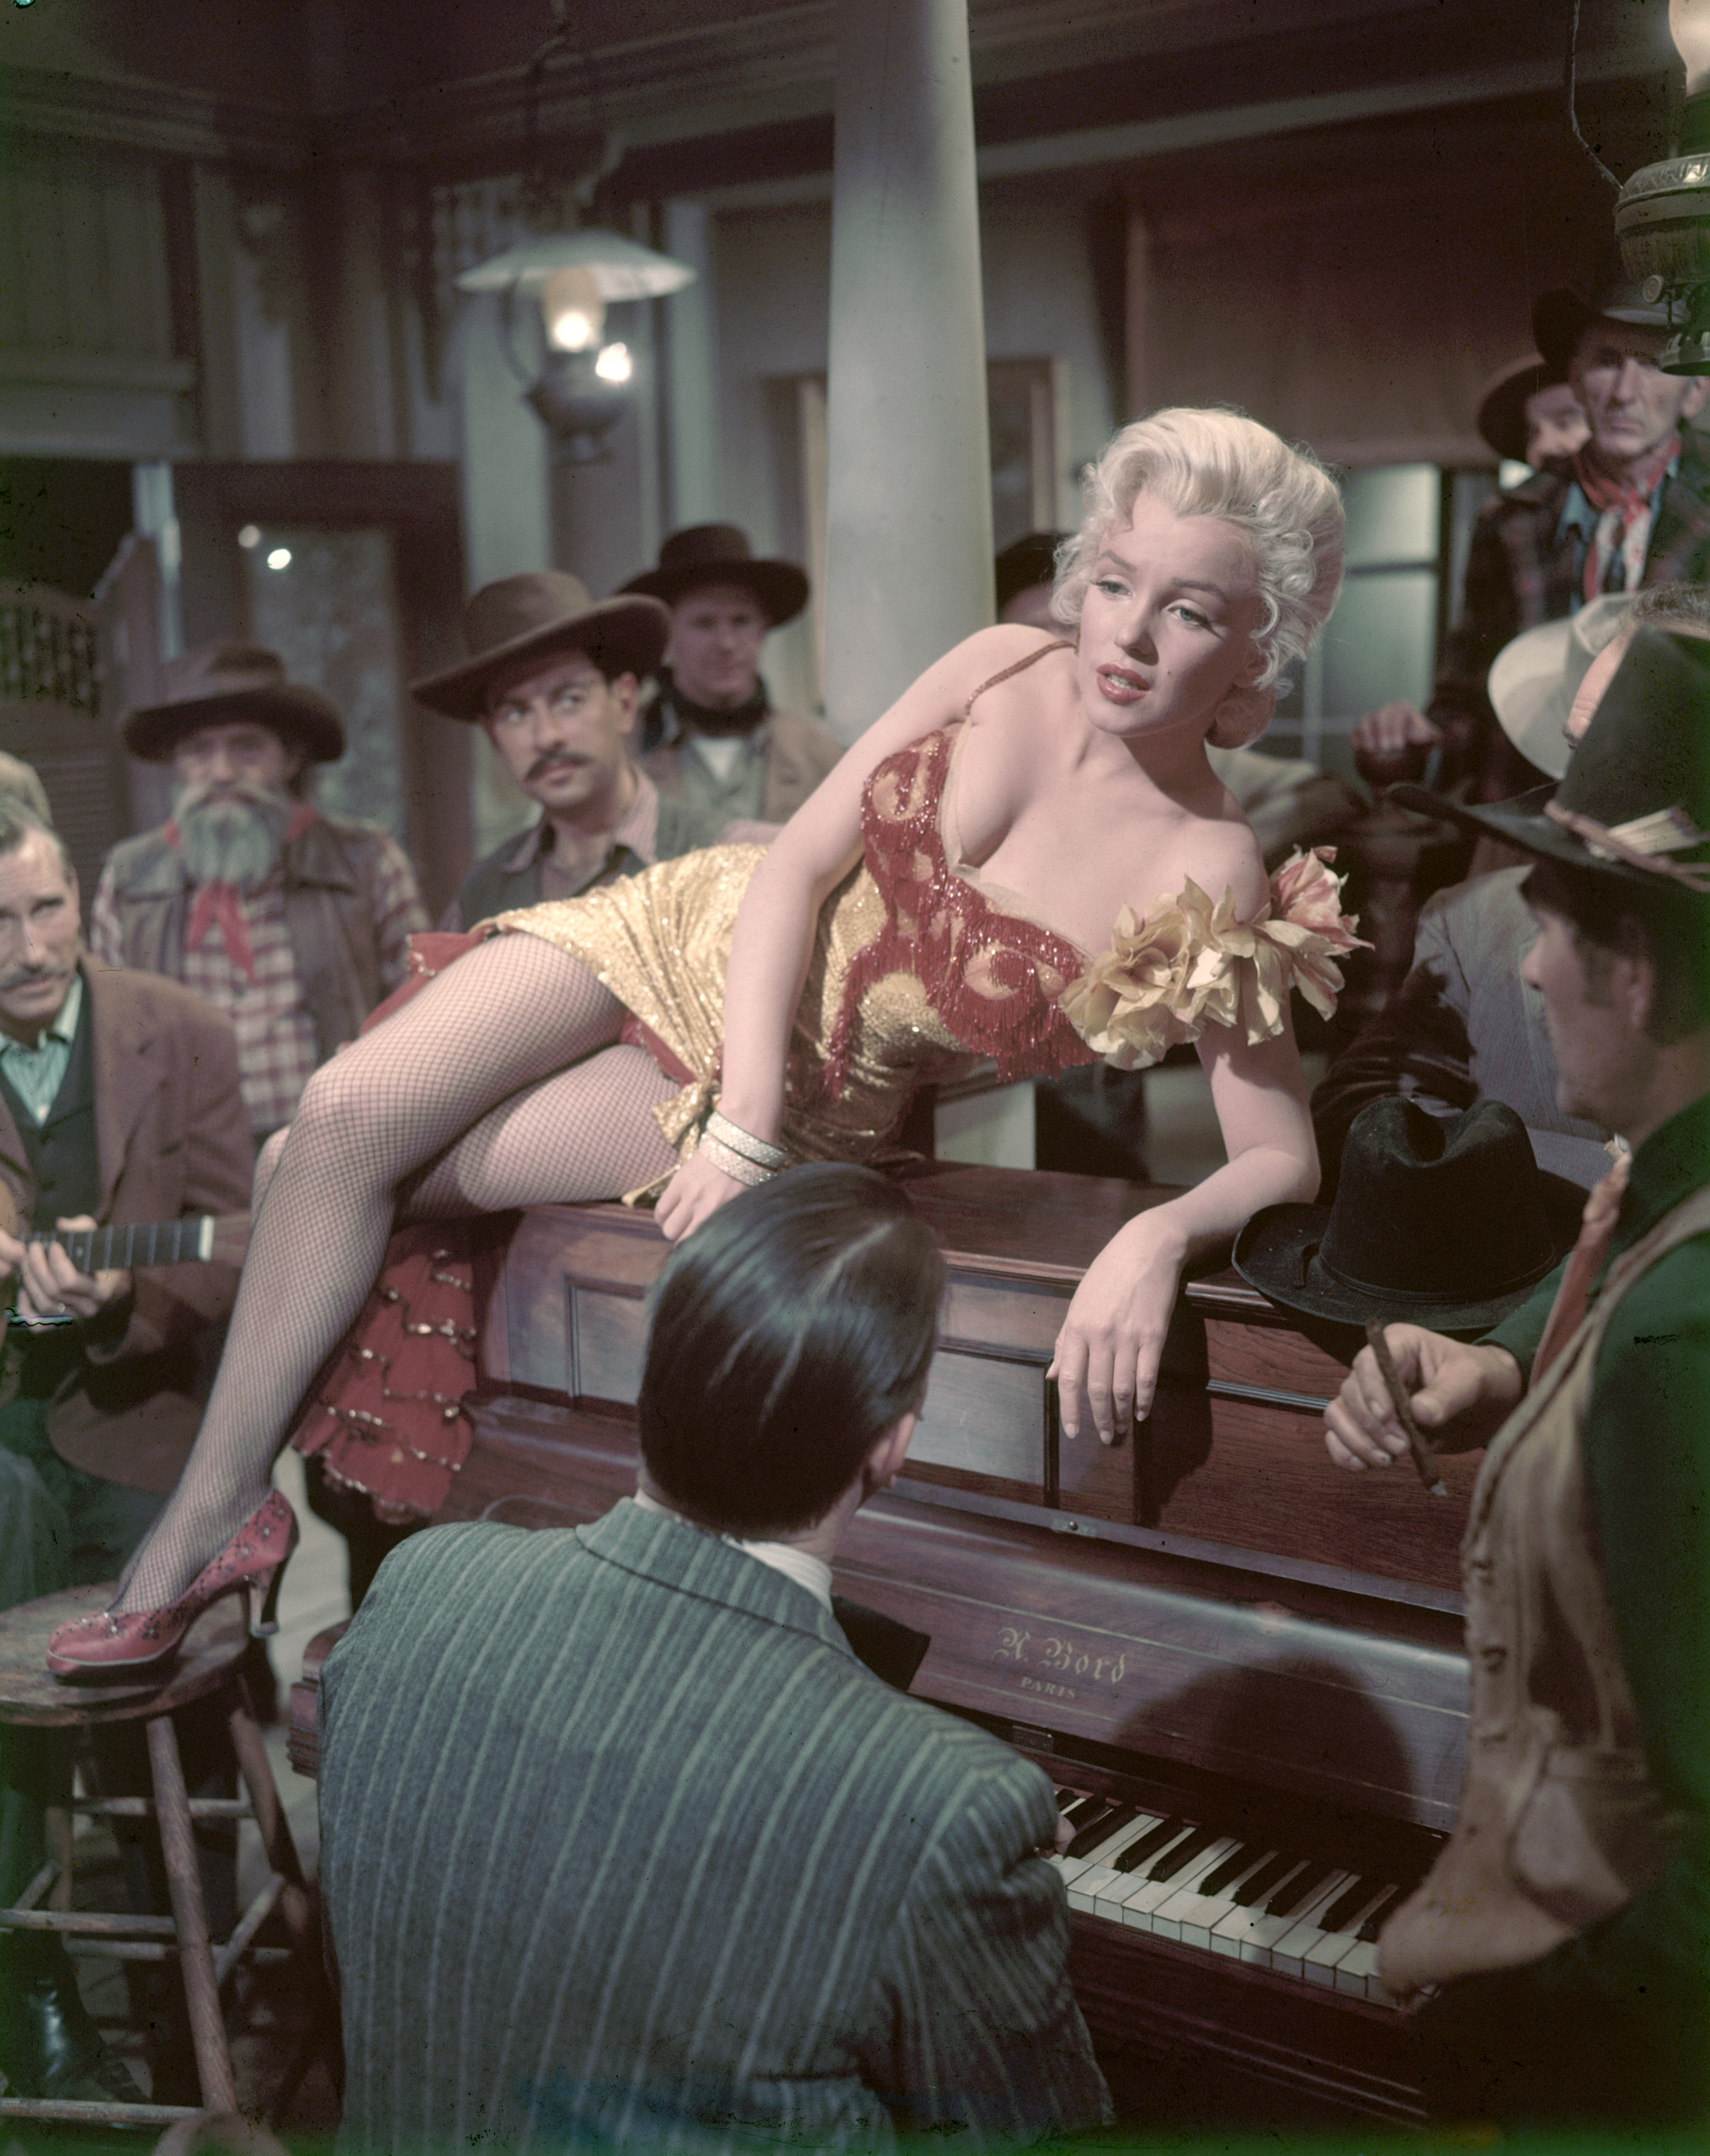 Marilyn Monroe sitting on a piano in a scene from movie "River of No Return," 1954.